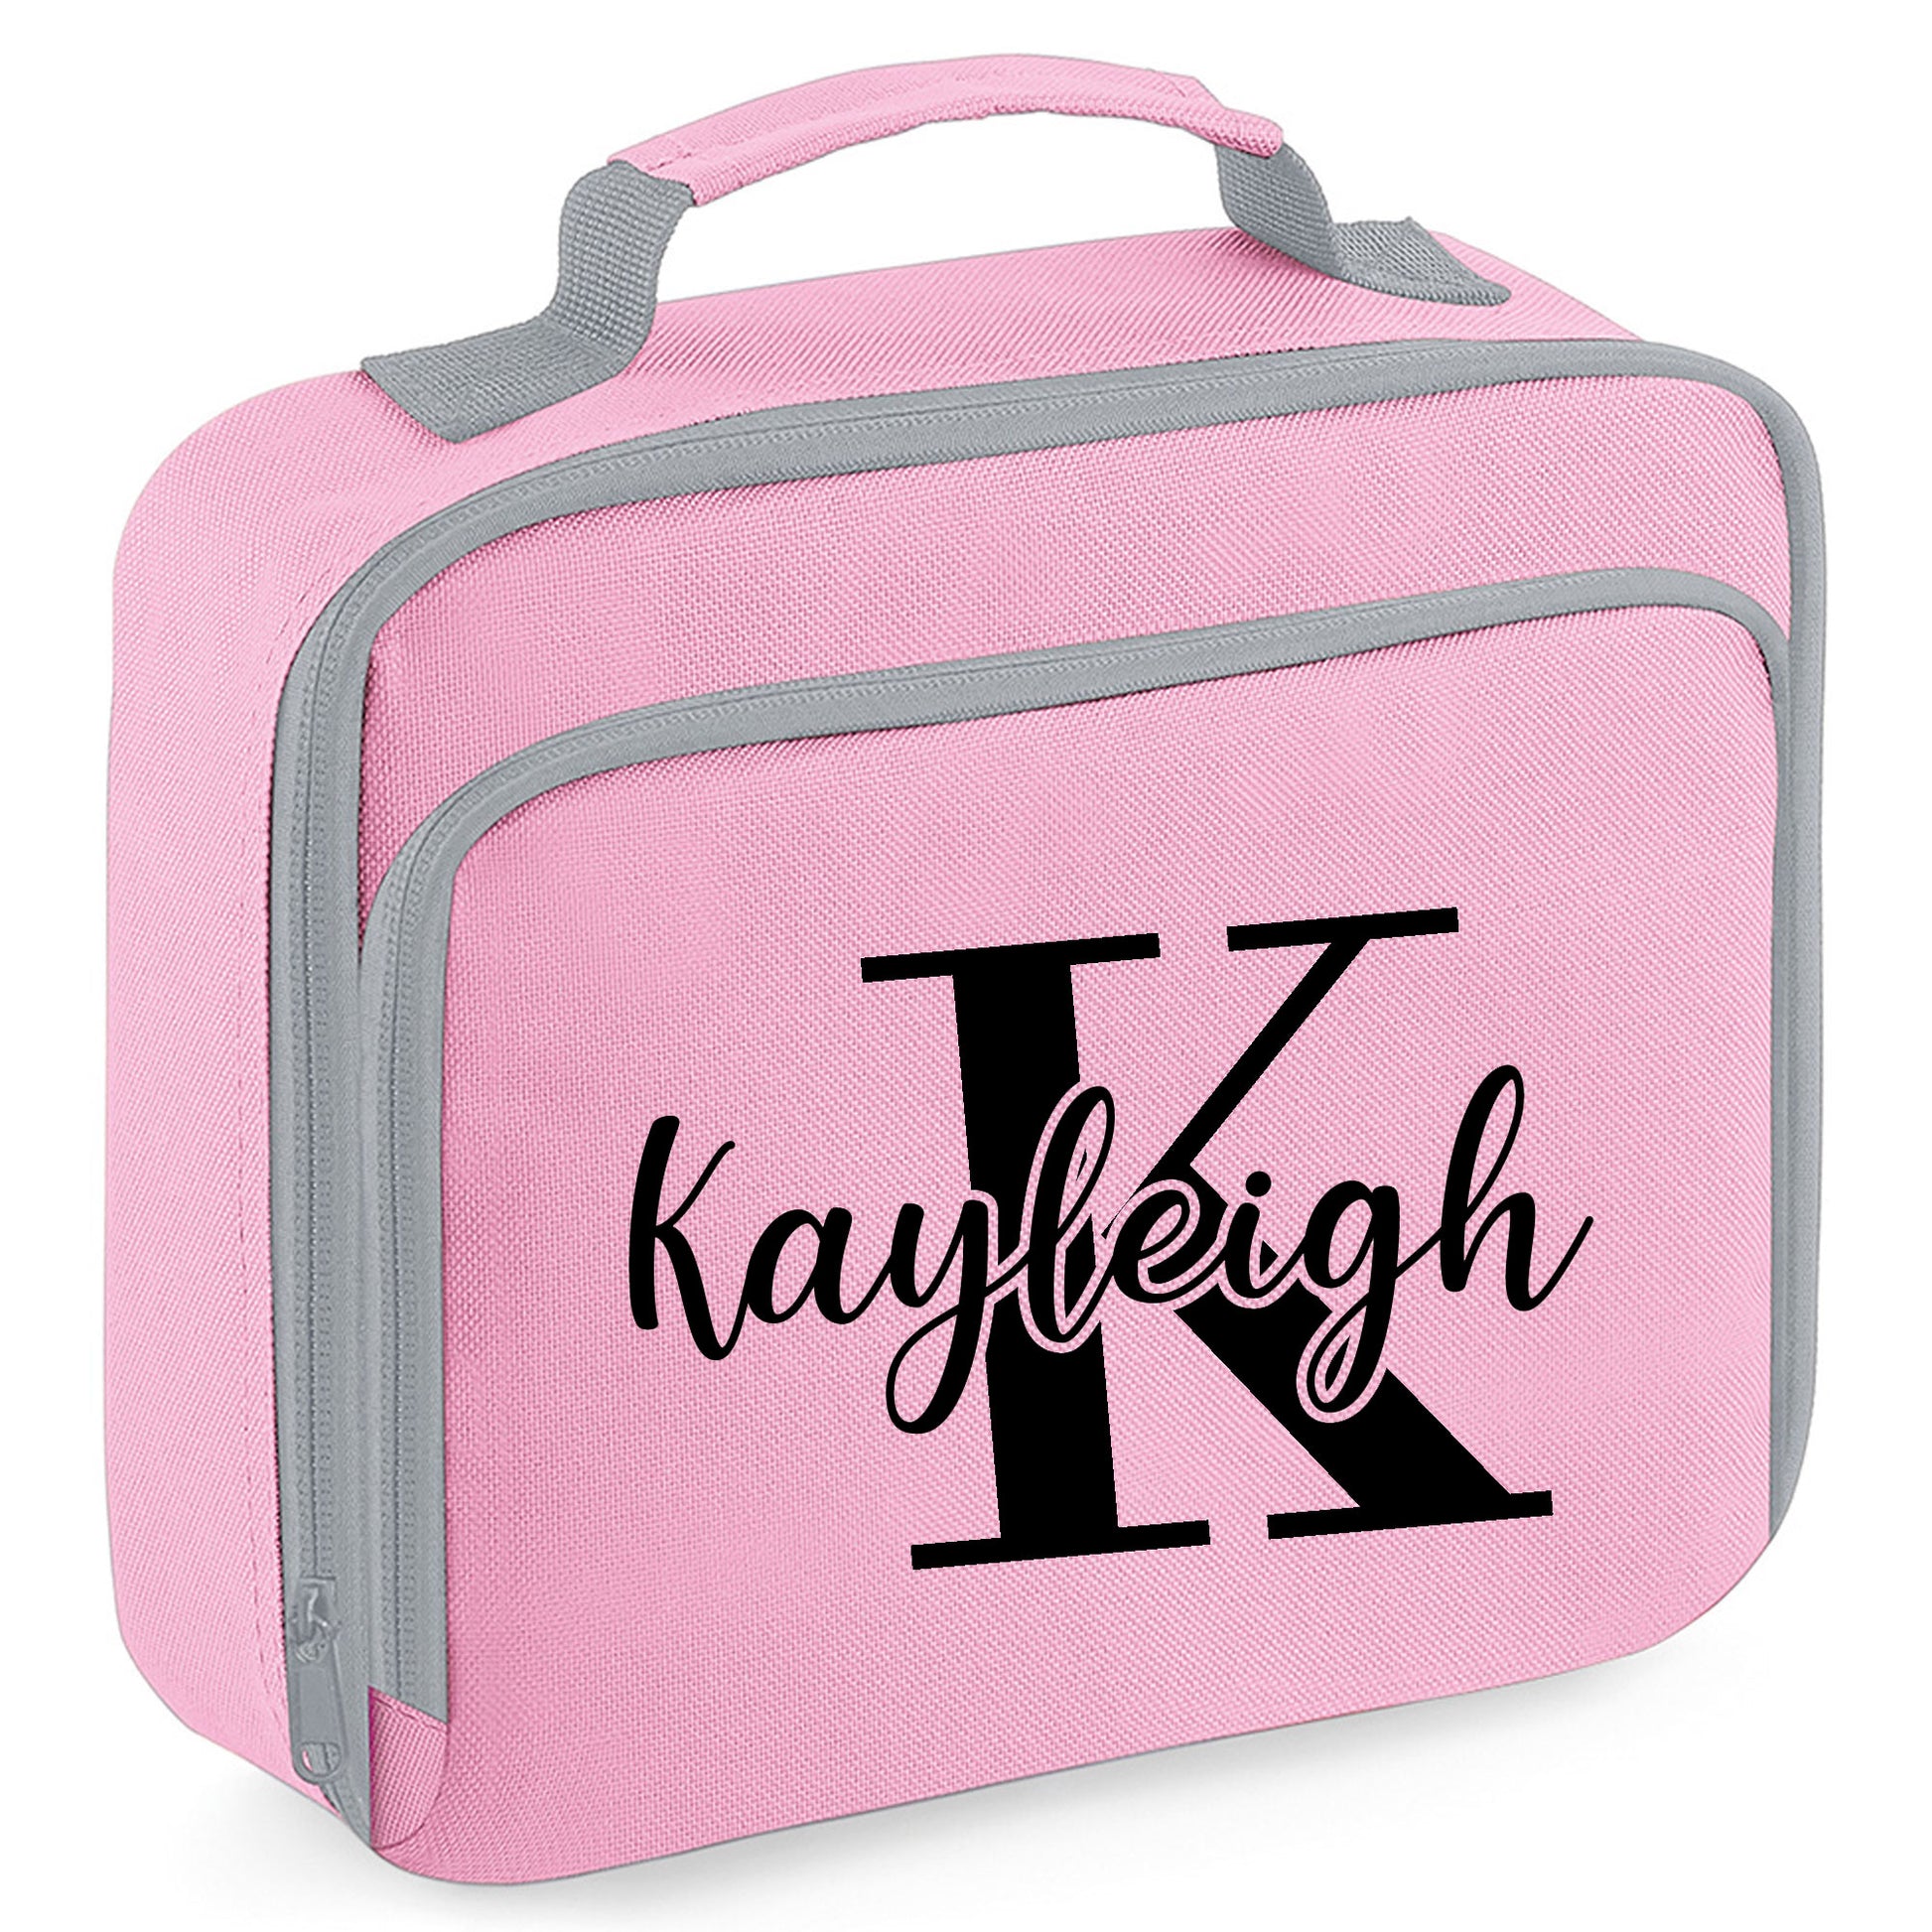 Personalised Lunch Bag with Name Childs School Lunch Box  - Always Looking Good - Pink  